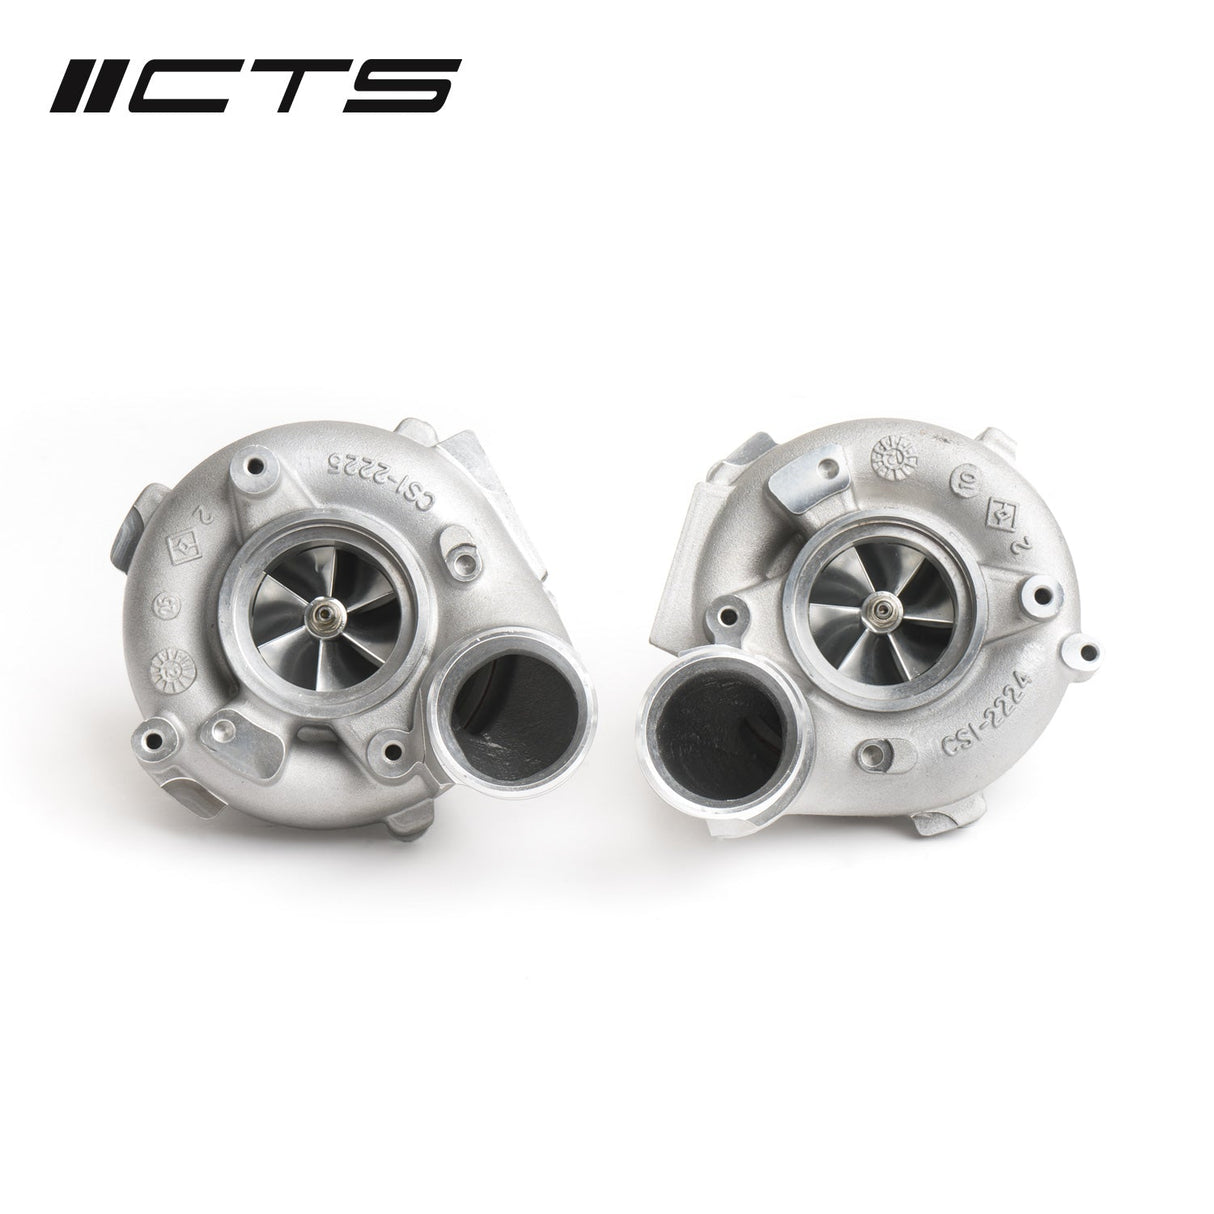 CTS Turbo Super Core RS7 Turbo Set for Audi C7 S6/S7/S8/RS6/RS7